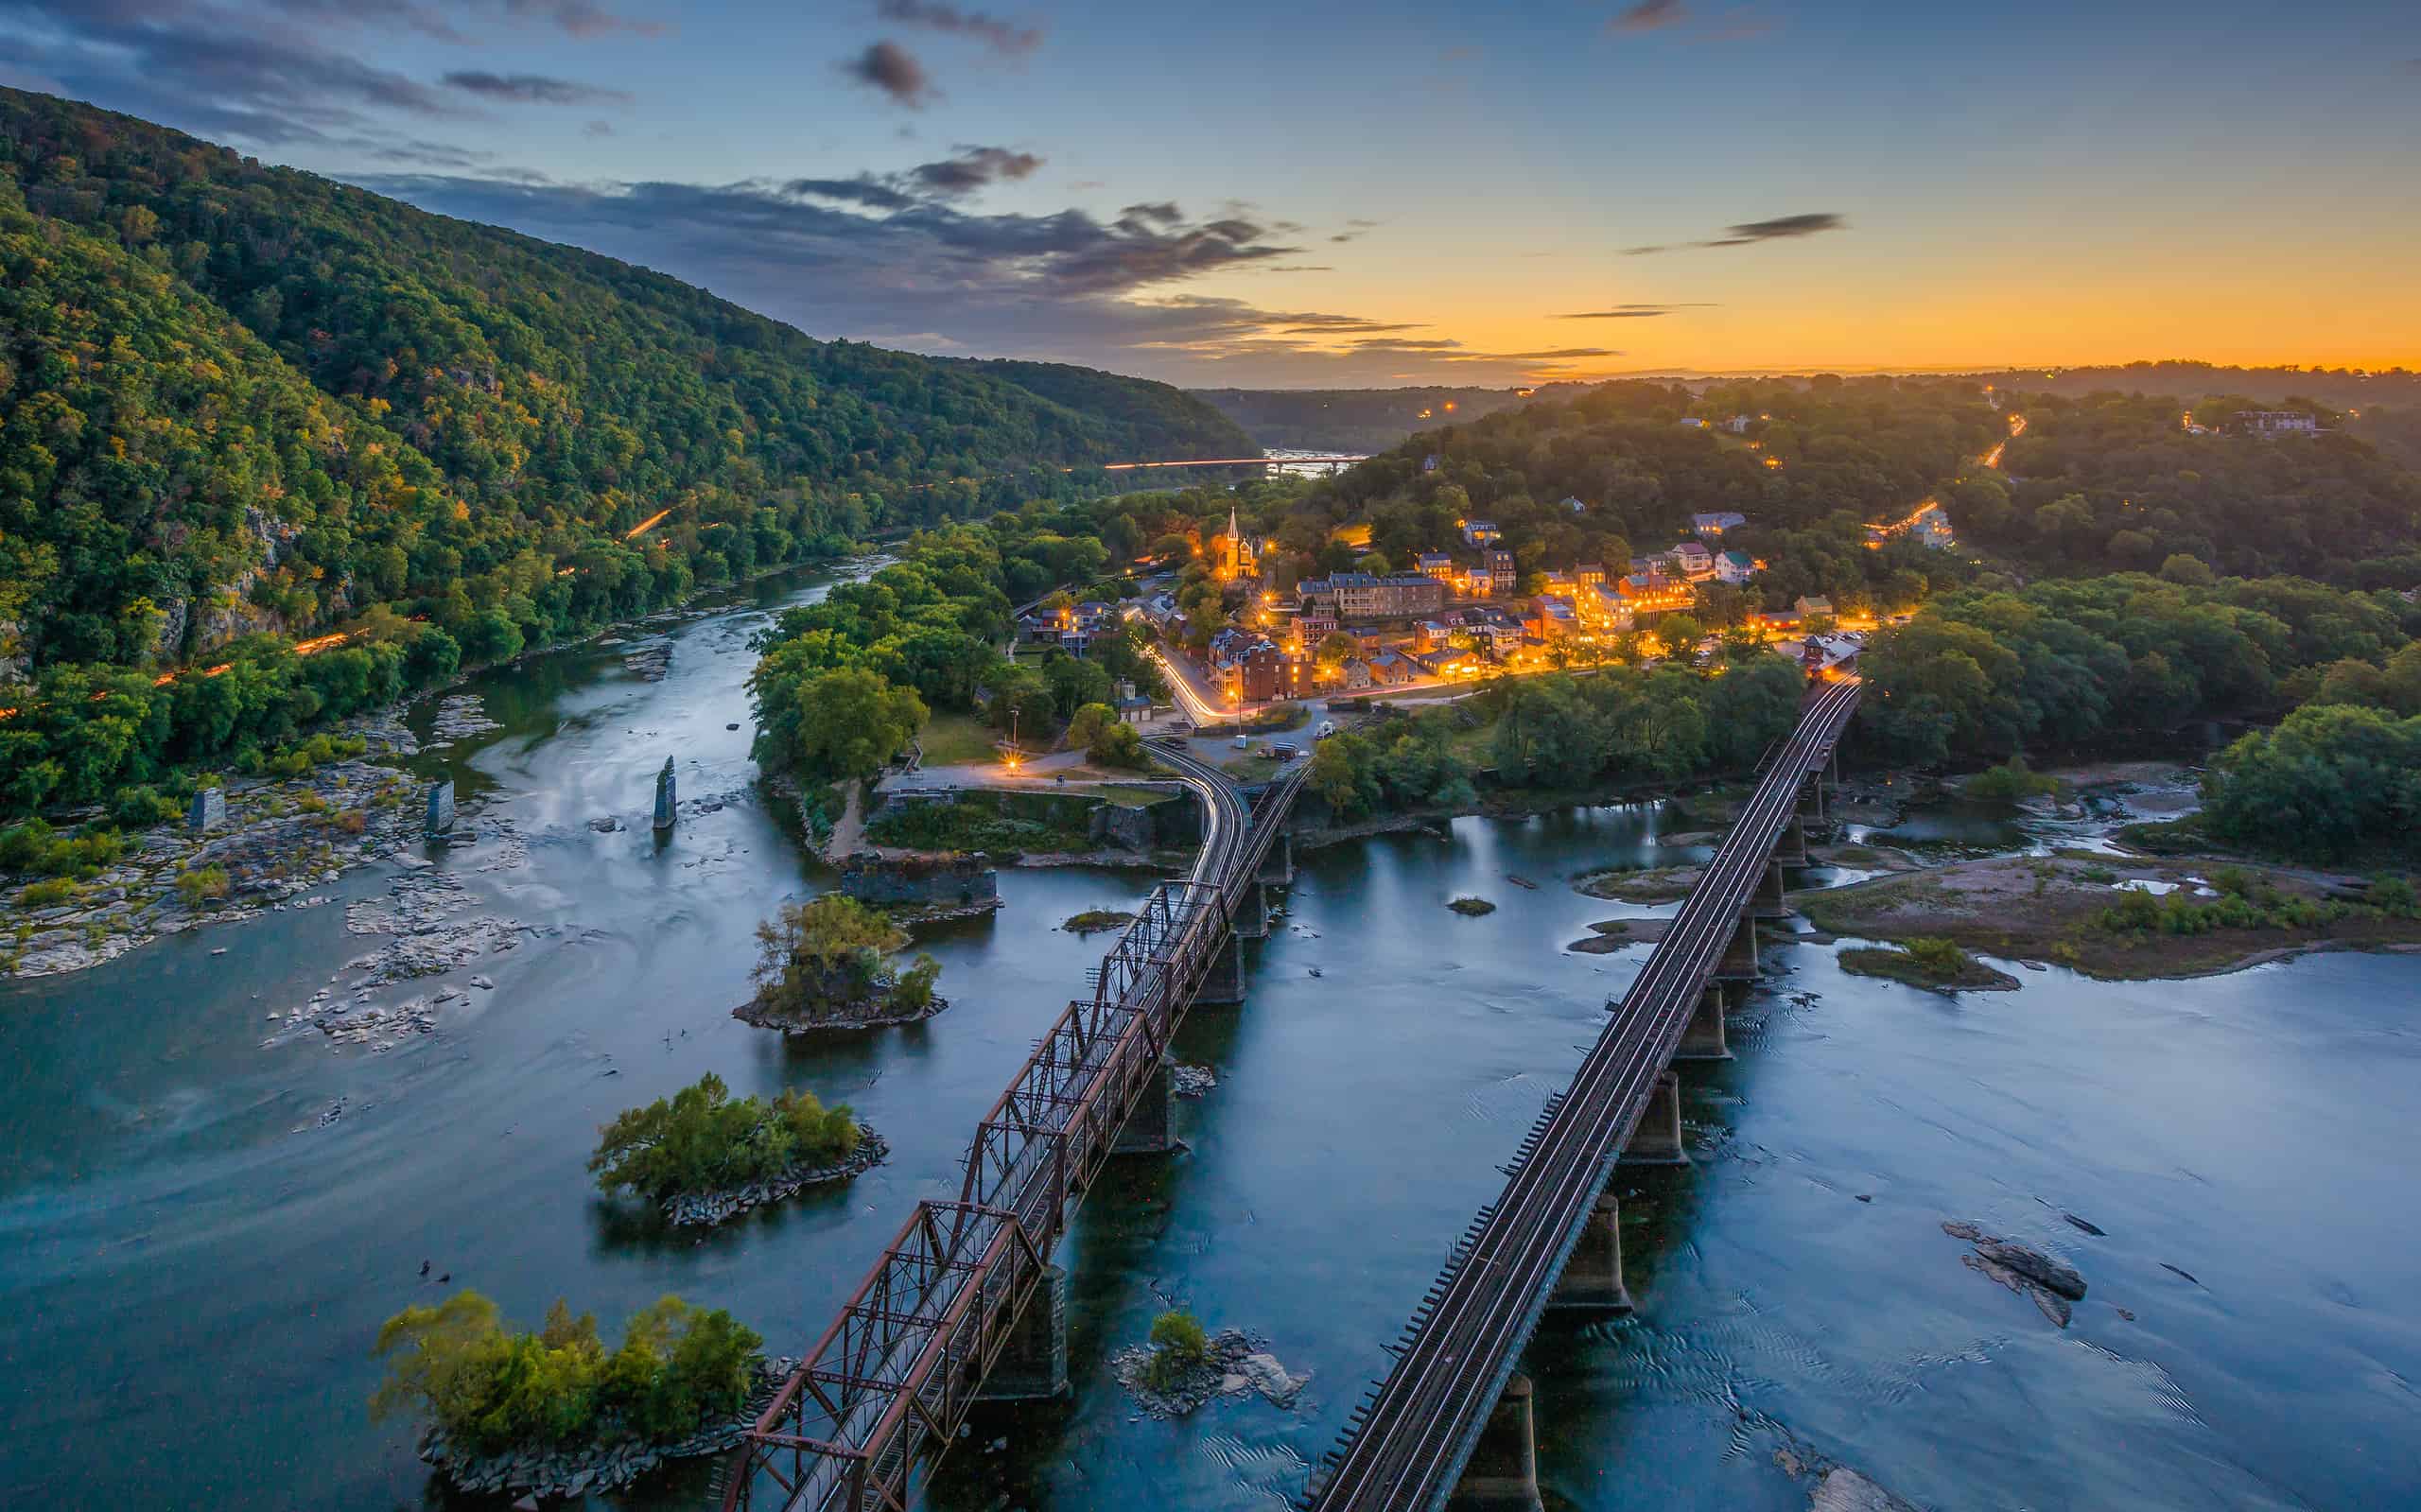 View of Harpers Ferry, West Virginia at sunset from Maryland Heights